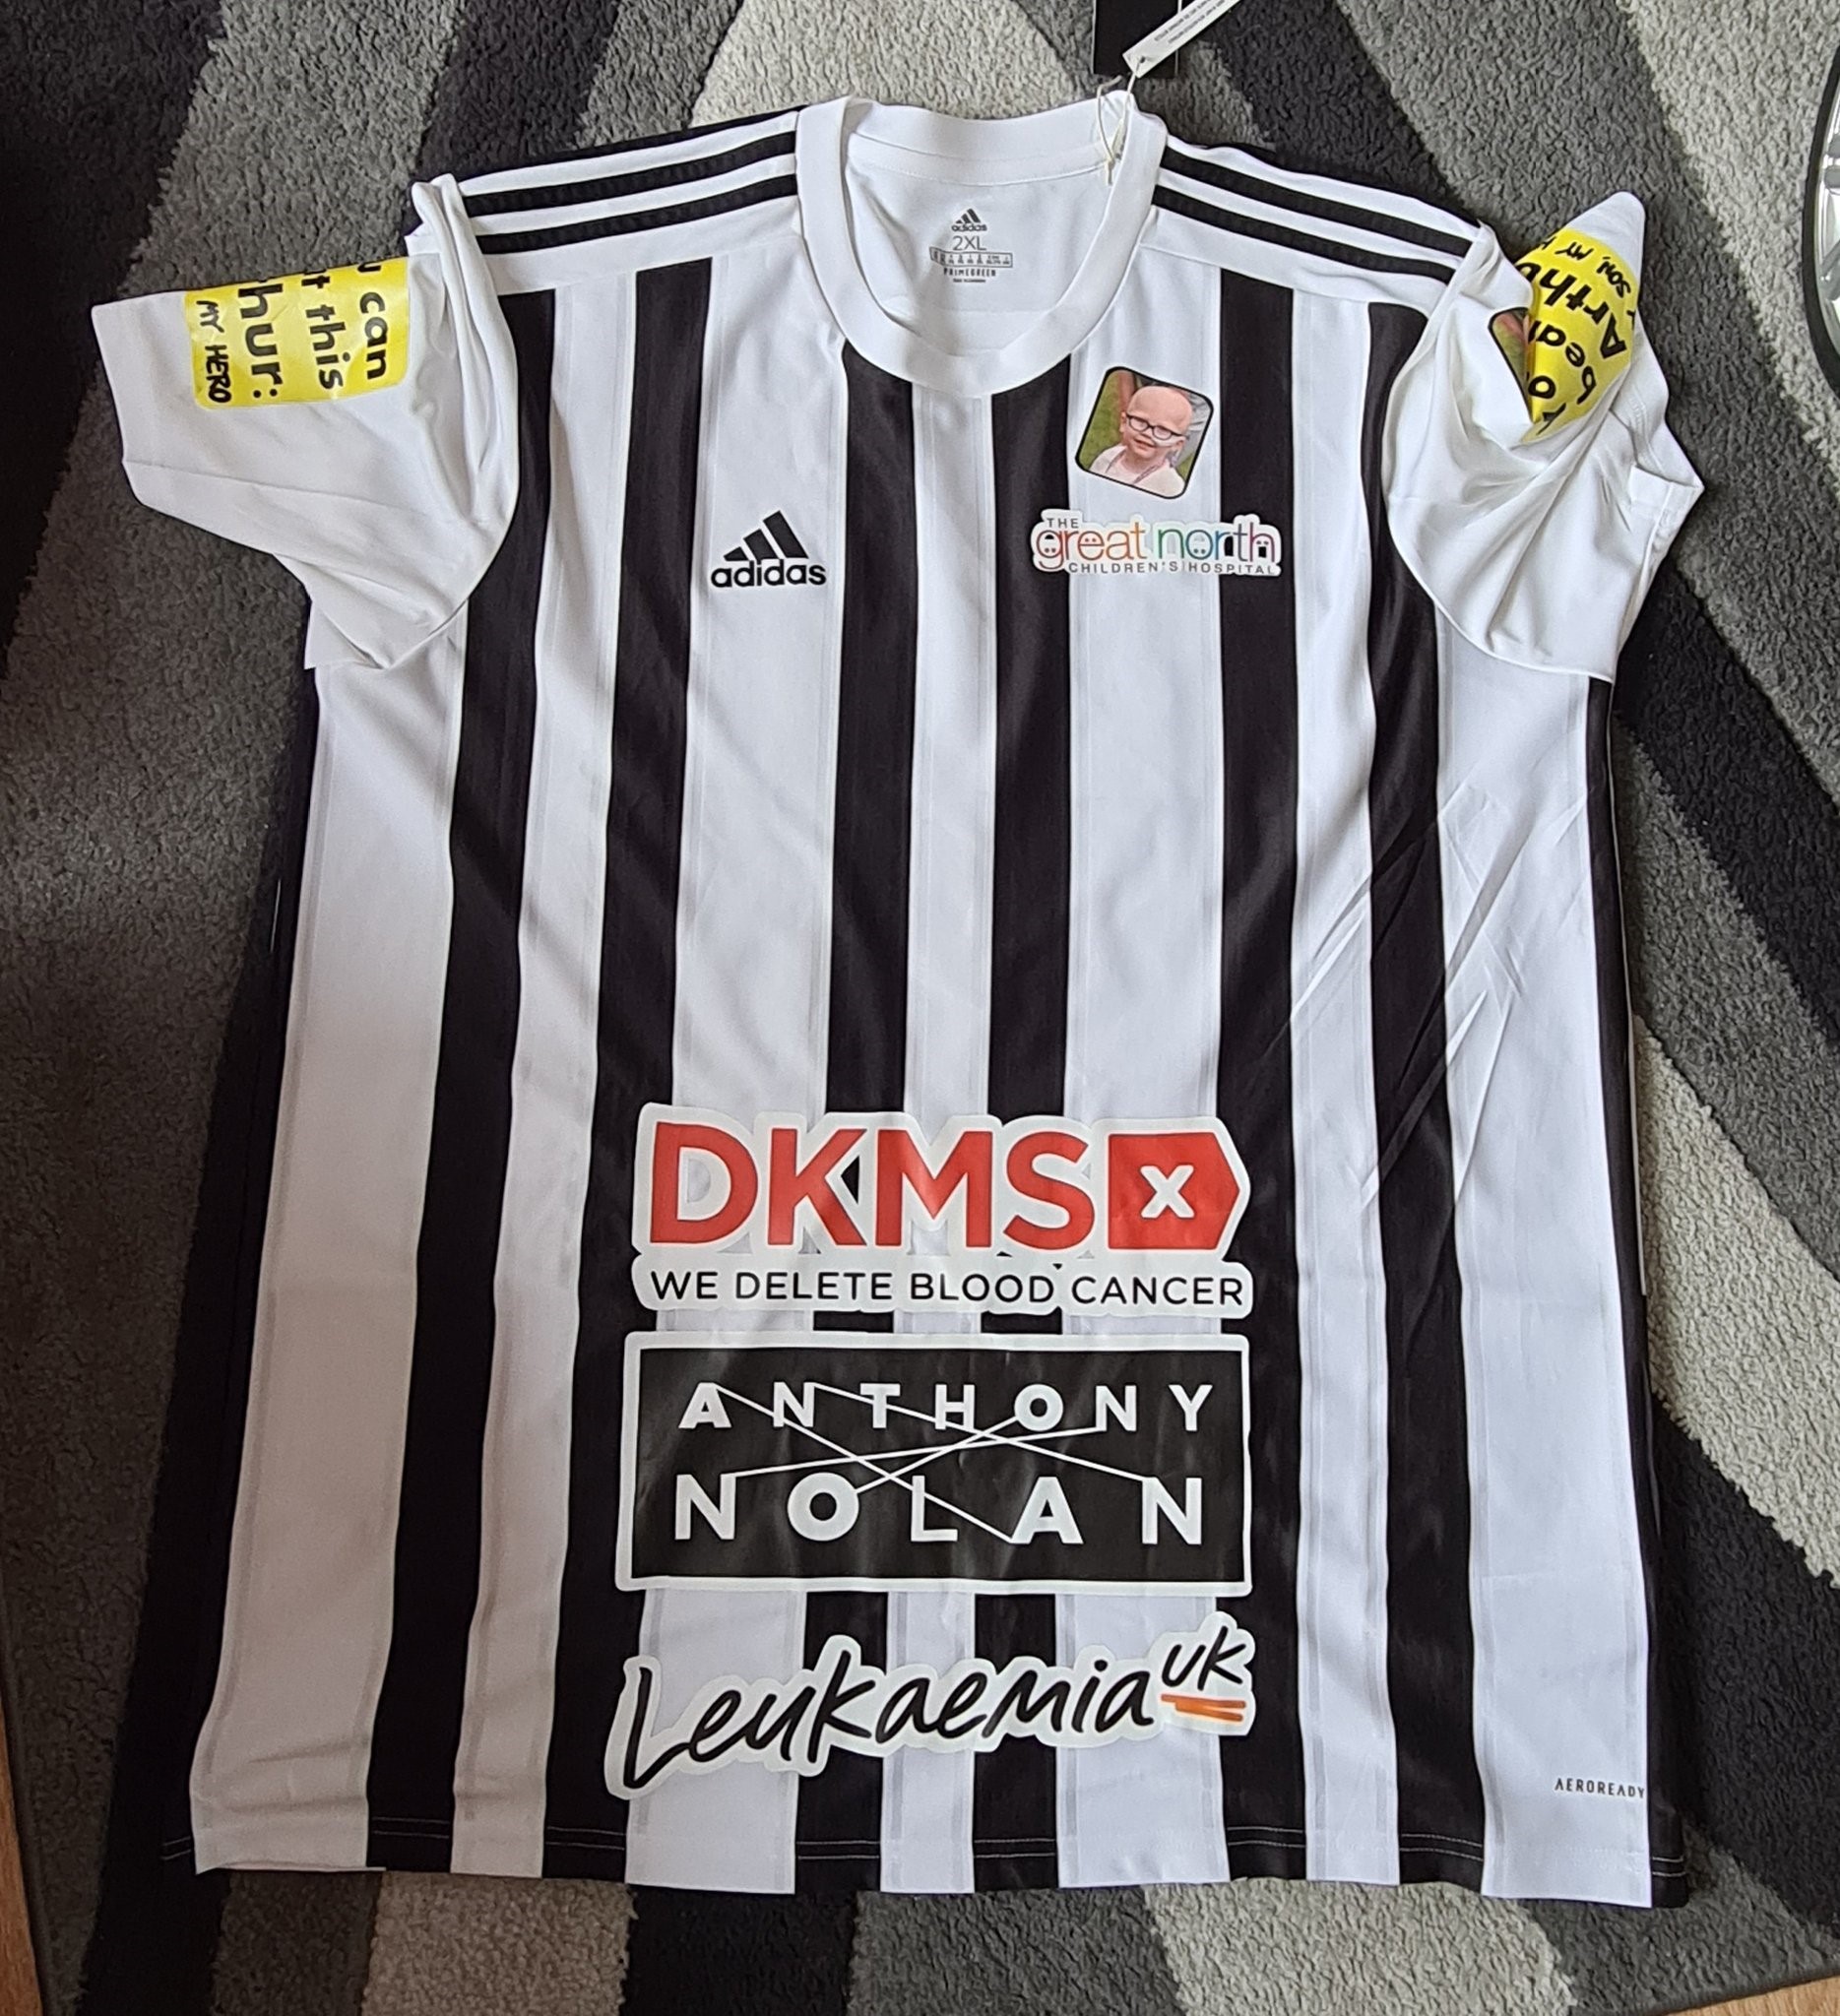 A shirt given to Arthur by Newcastle United